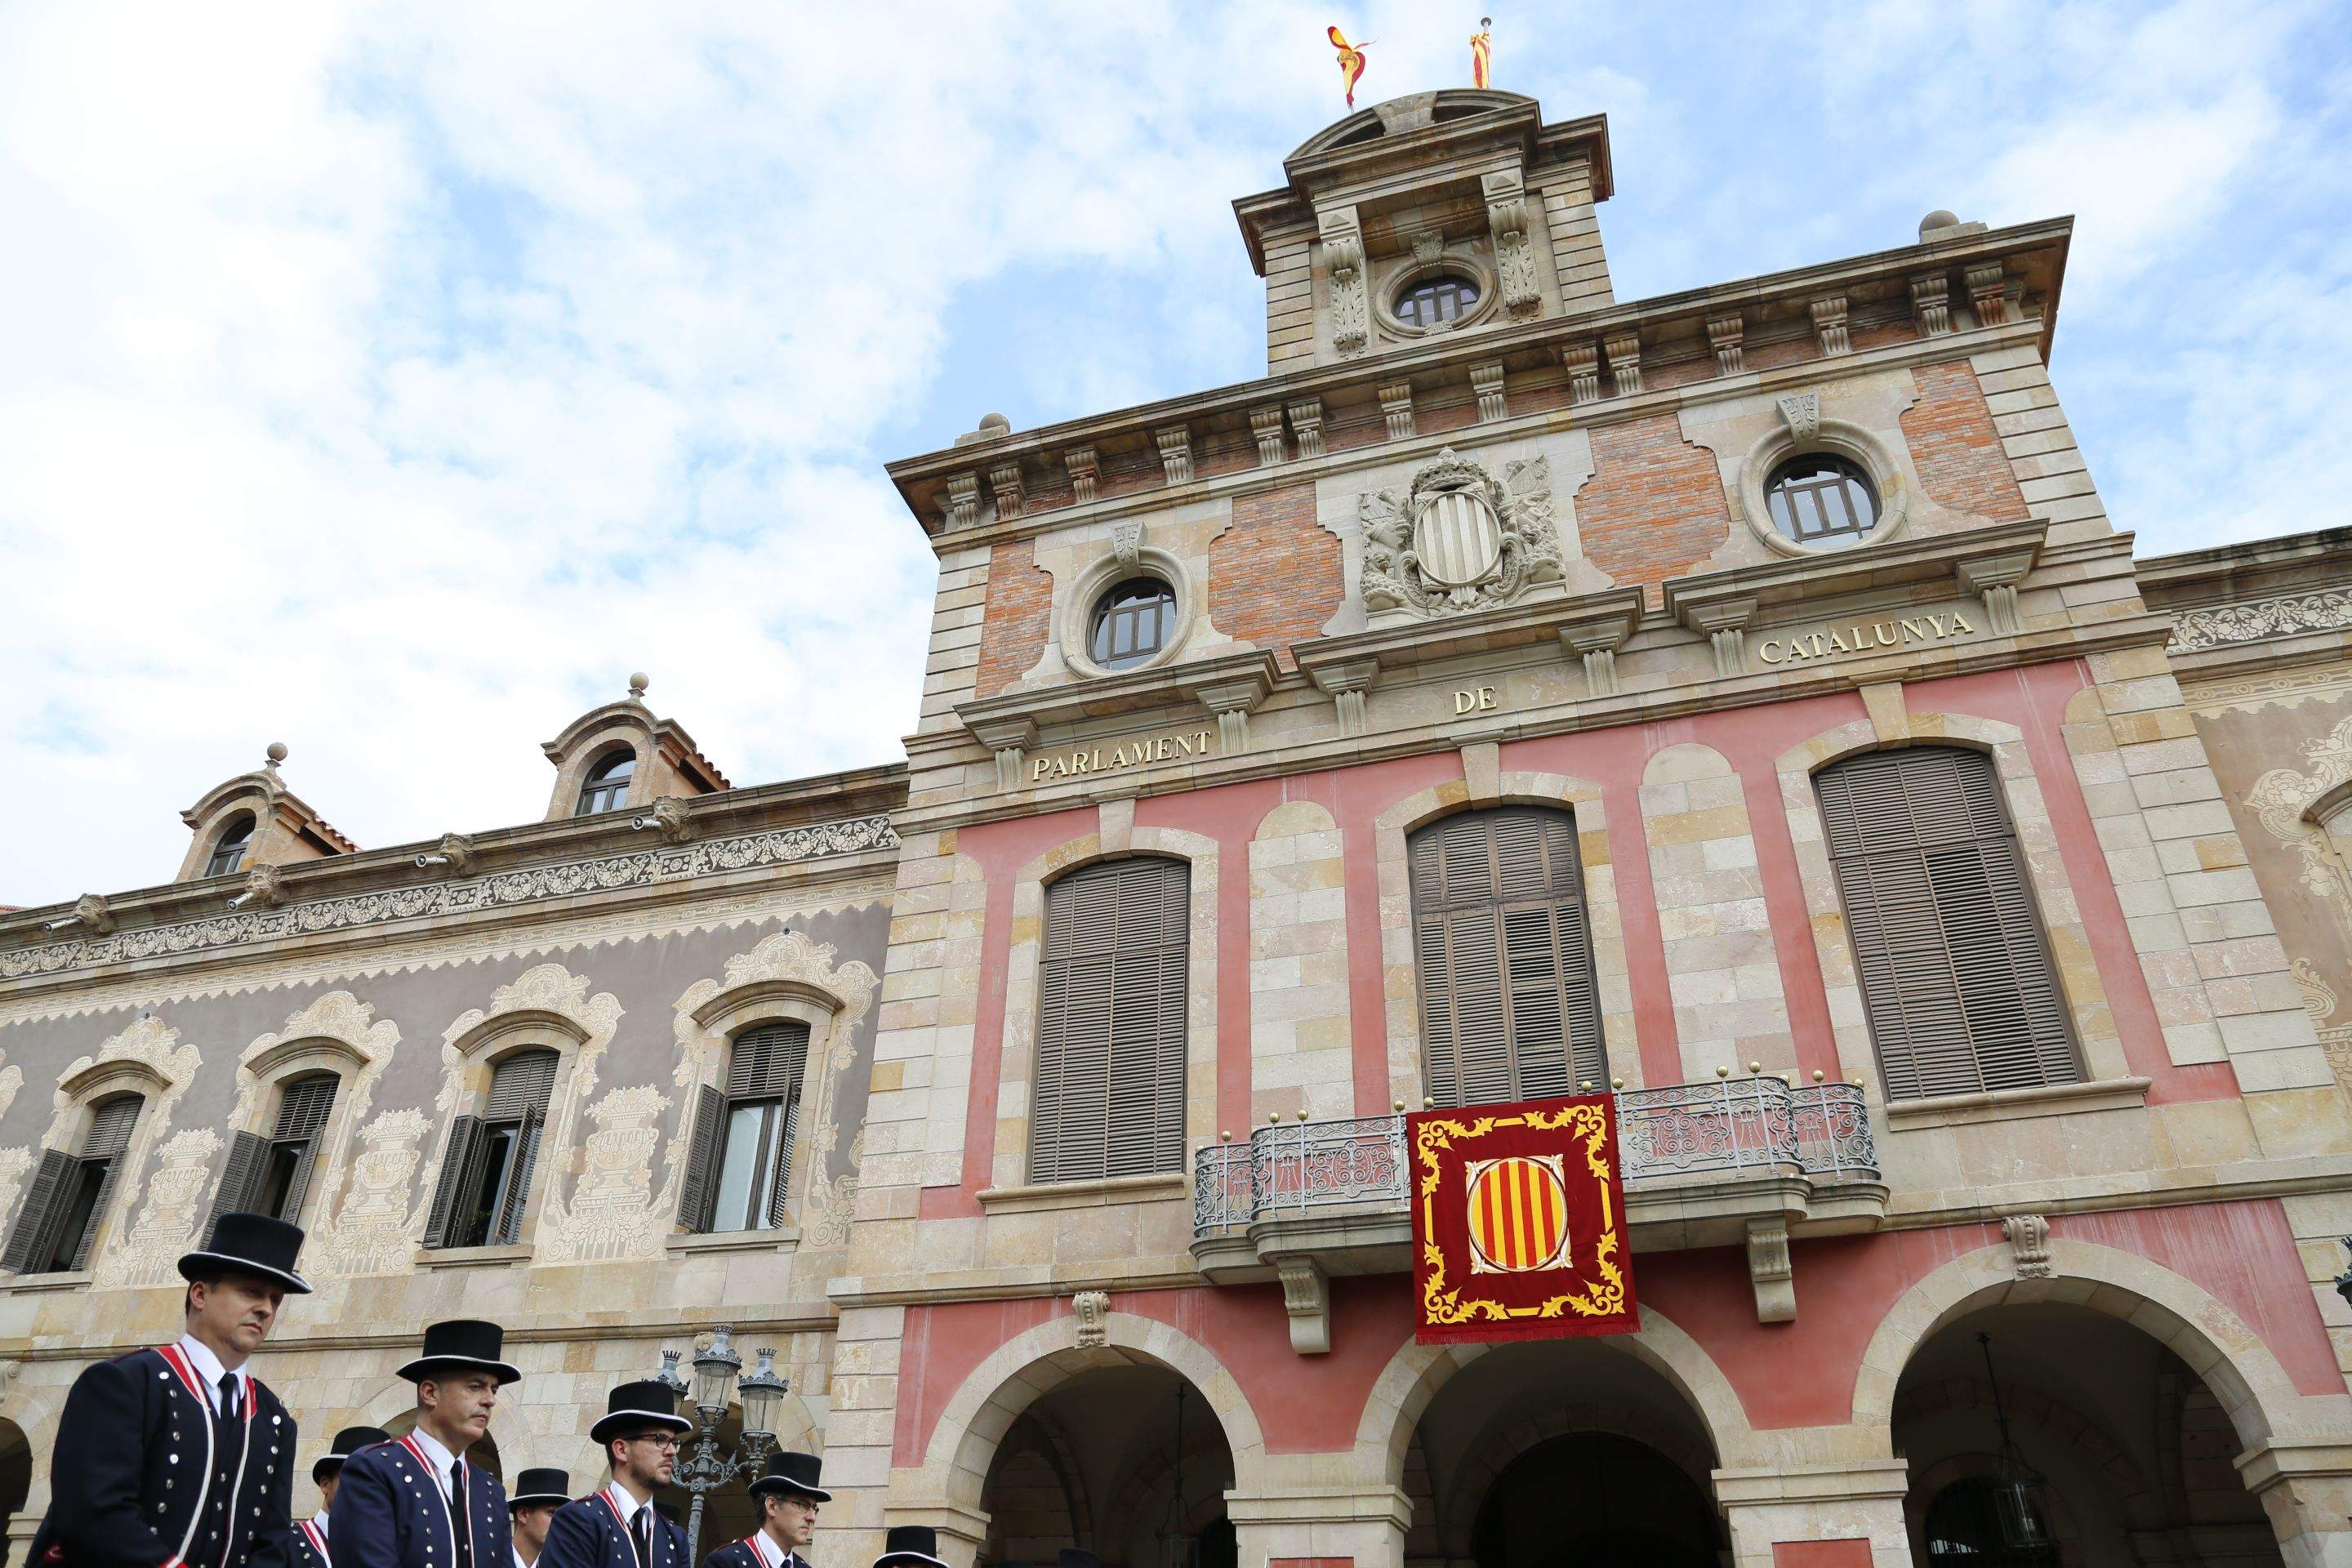 'Le Figaro' warns: "The constitution of the Catalan Parliament risks being troubled"